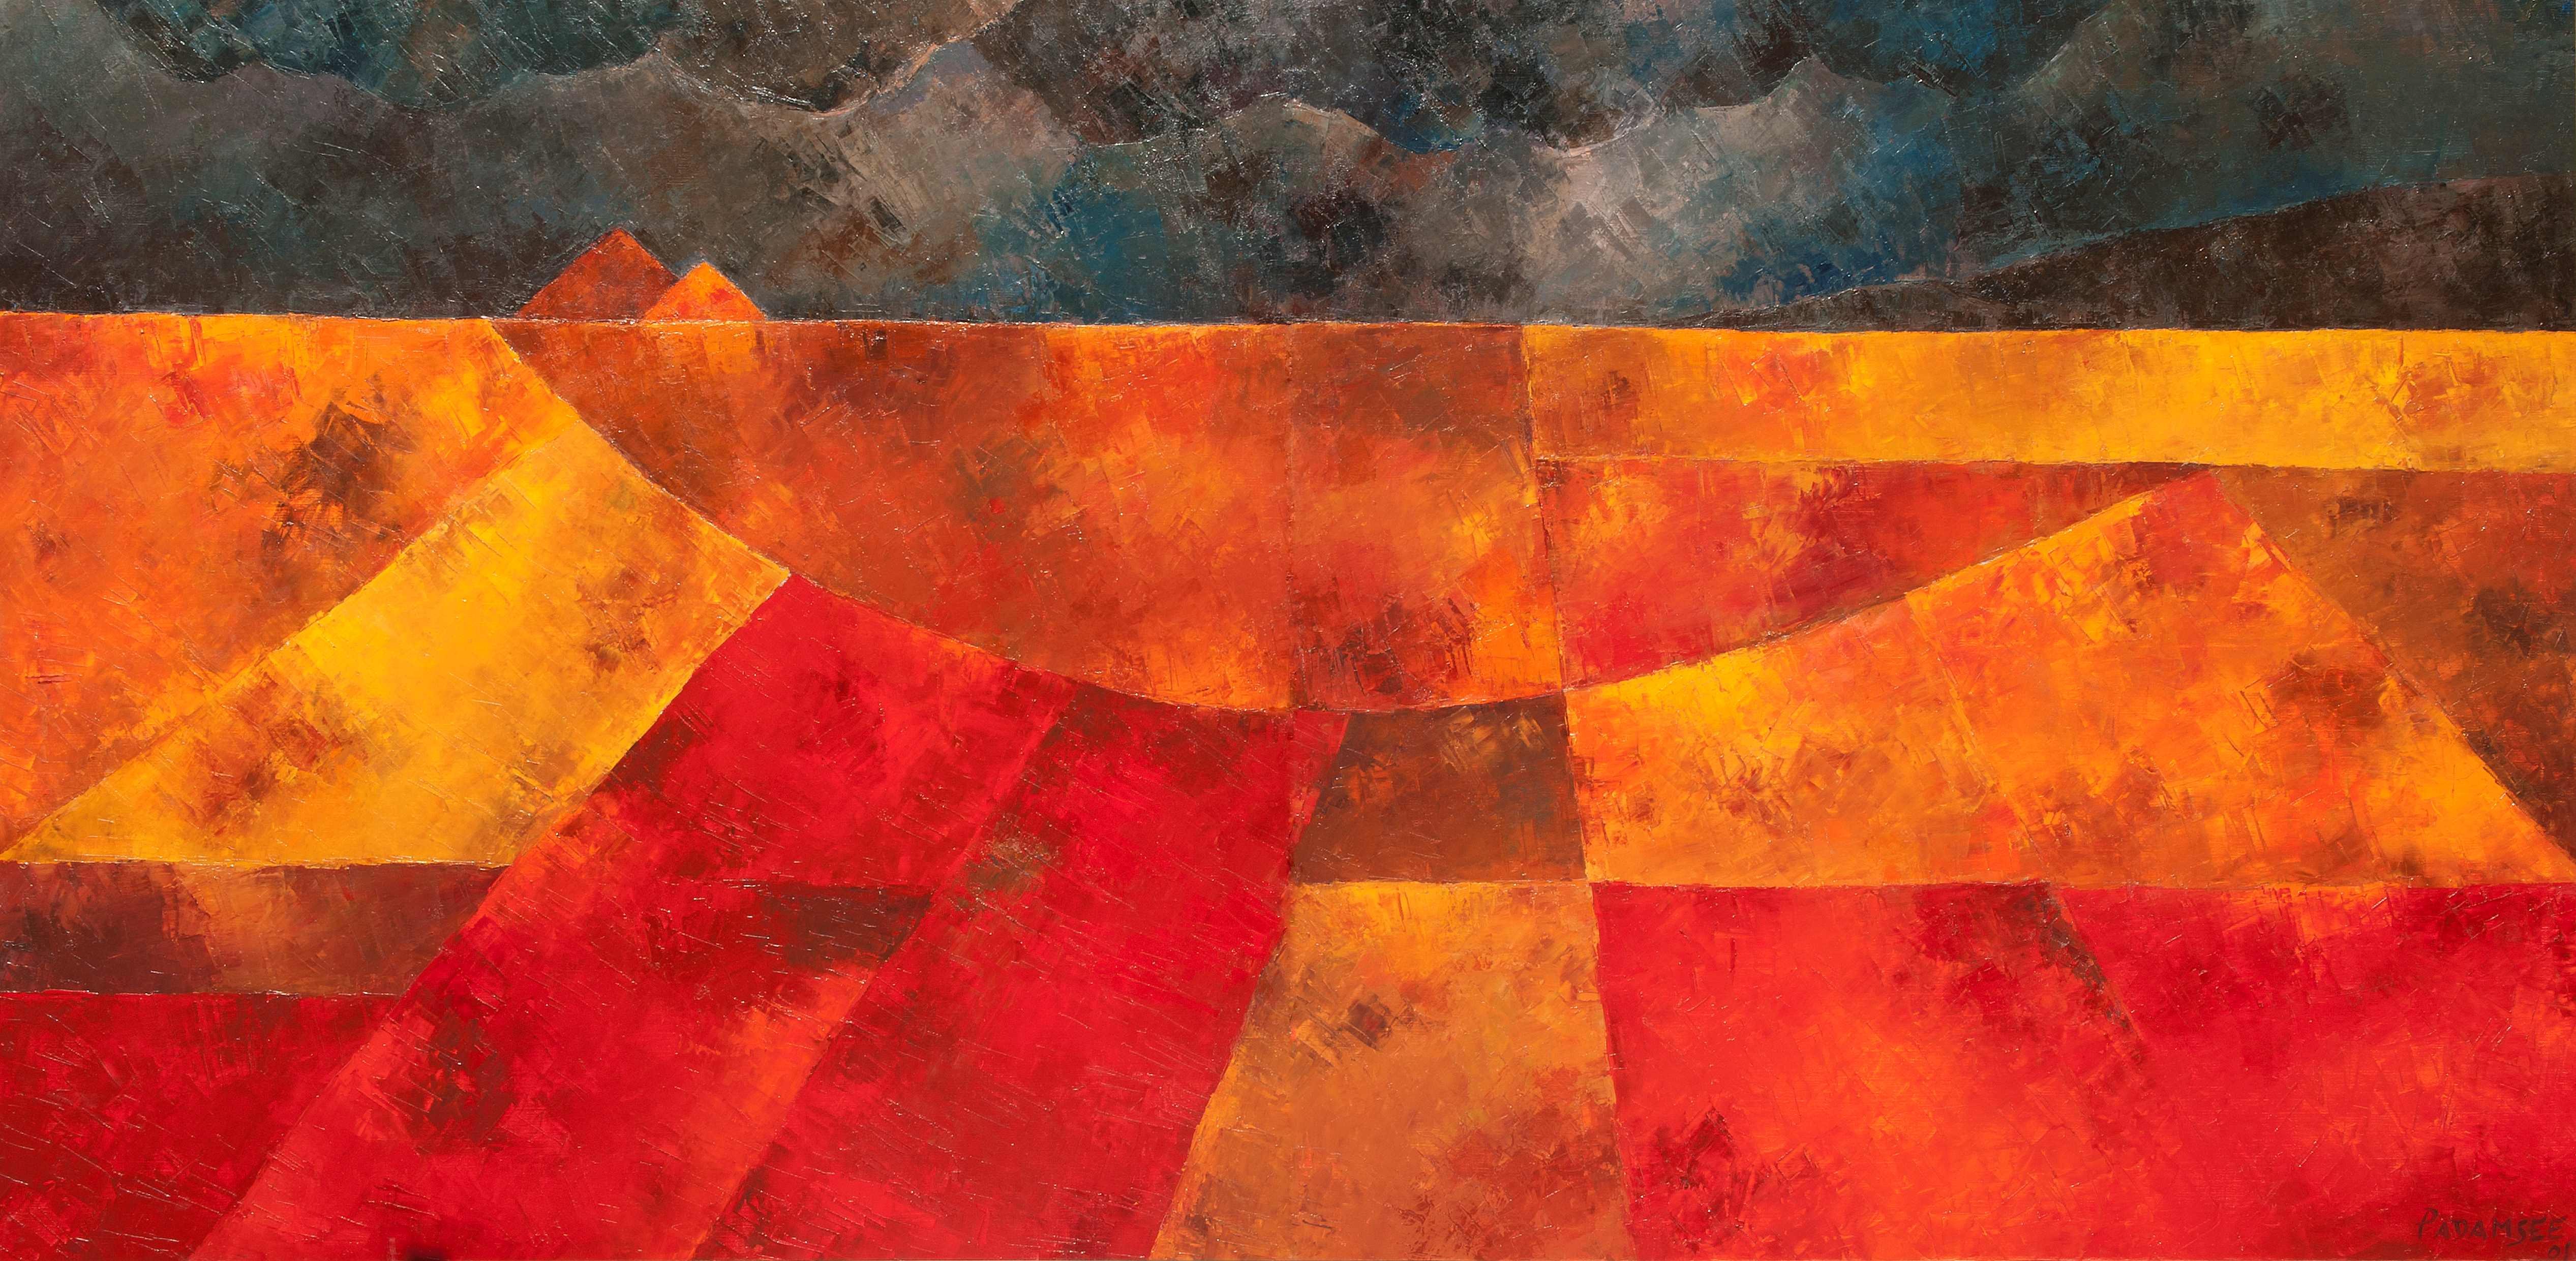 Akbar Padamsee's 48X96 Inches Oil on Canvas 2001 Metascape